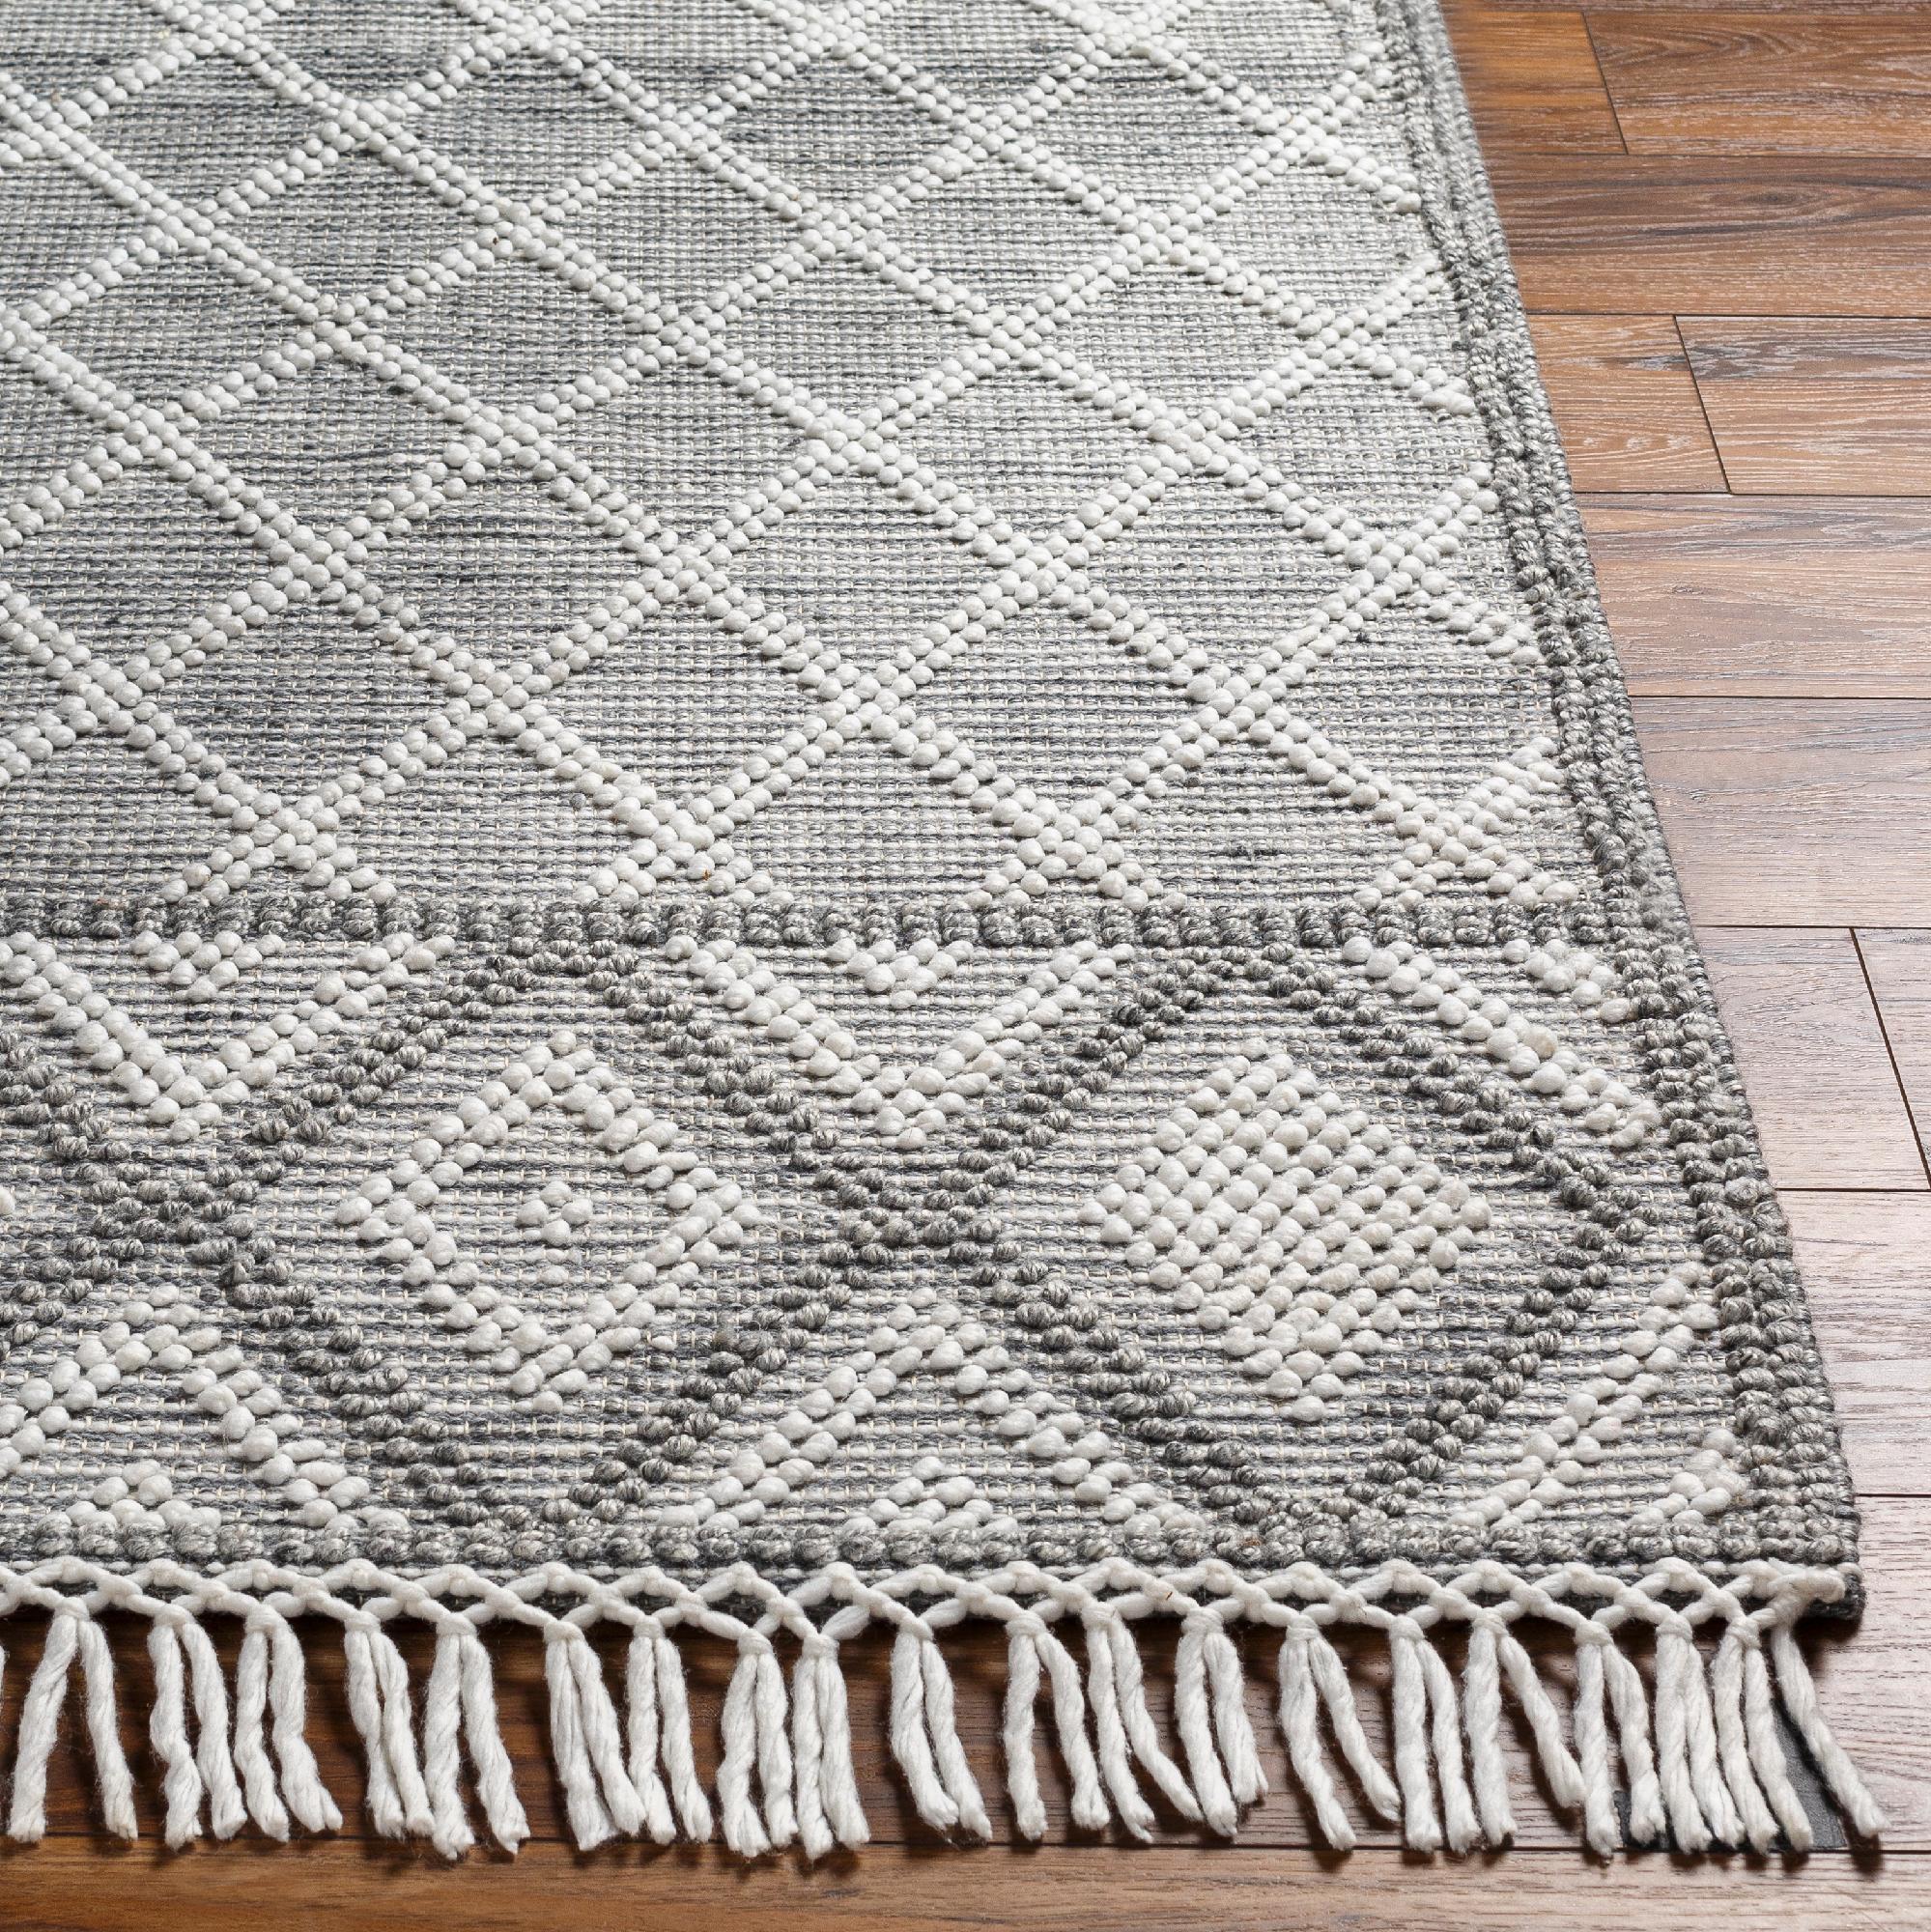 Mark&Day Area Rugs, 2x4 Ovgoros Global Light Gray Area Rug (2'3" x 3'9") - image 5 of 6